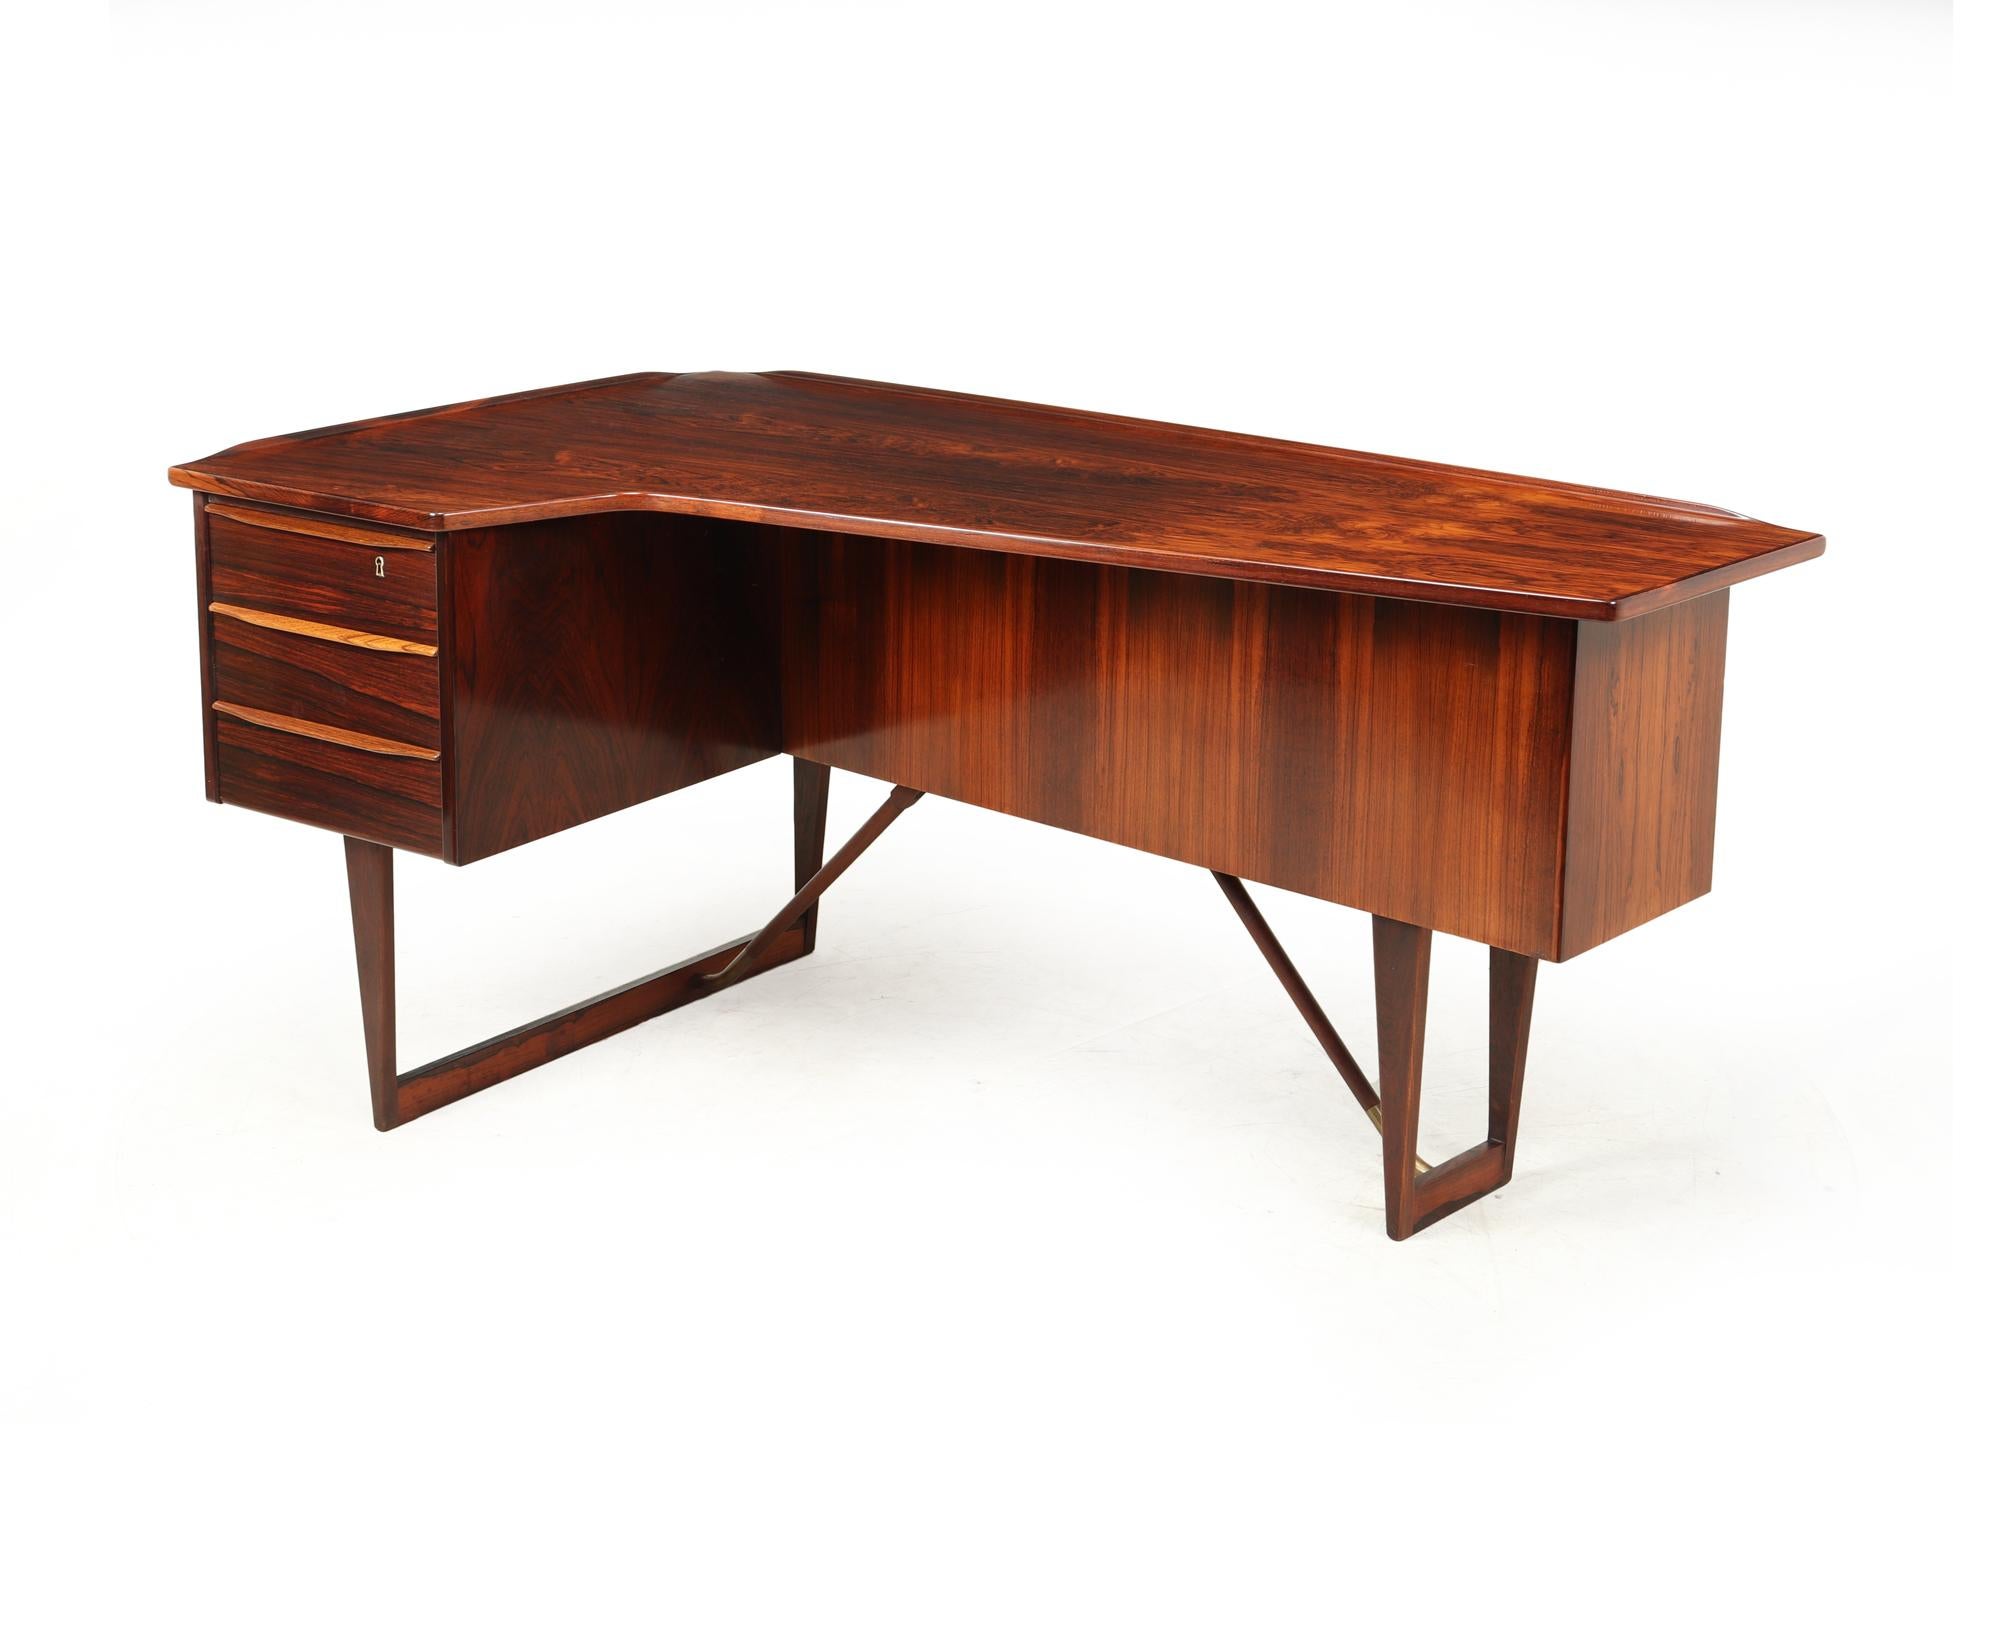 A Mid-Century Modern boomerang desk. Design by Peter Løvig Nielsen for Hedensted Møbelfabrik. Specialist Danish design from the mid fifties. The desk was produced in Denmark from solid rosewood and rosewood veneer with a nice warm grain. This